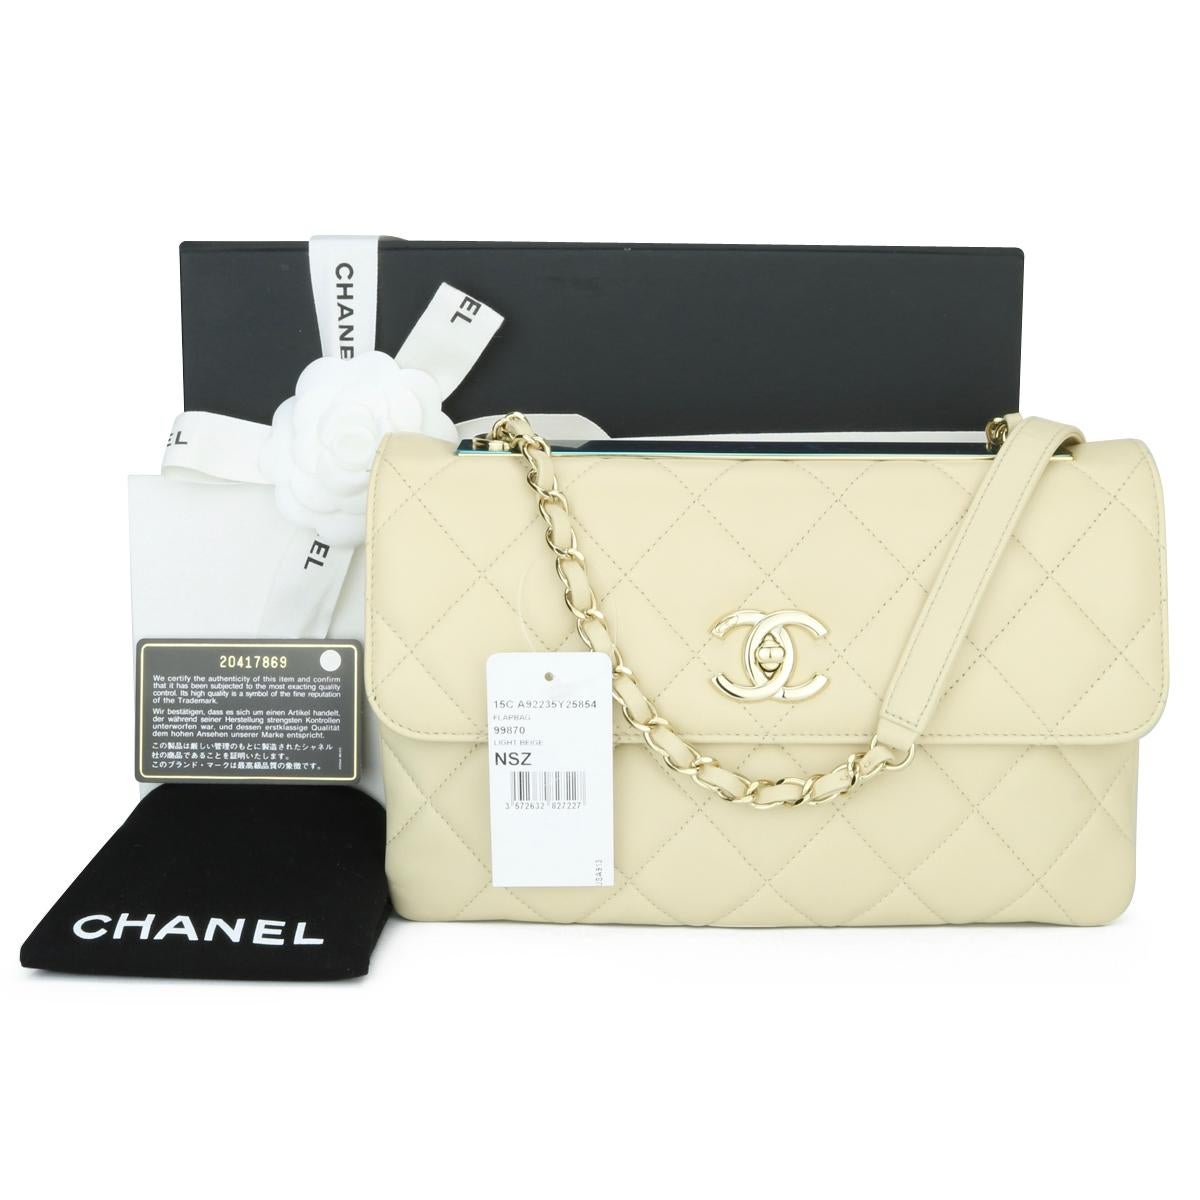 CHANEL Trendy CC Flap Shoulder Bag Light Beige Quilted Lambskin with Light Gold Hardware 2015.

This stunning bag is in pristine- never worn condition, the bag still holds its original shape, and the hardware is still very shiny. The leather smells